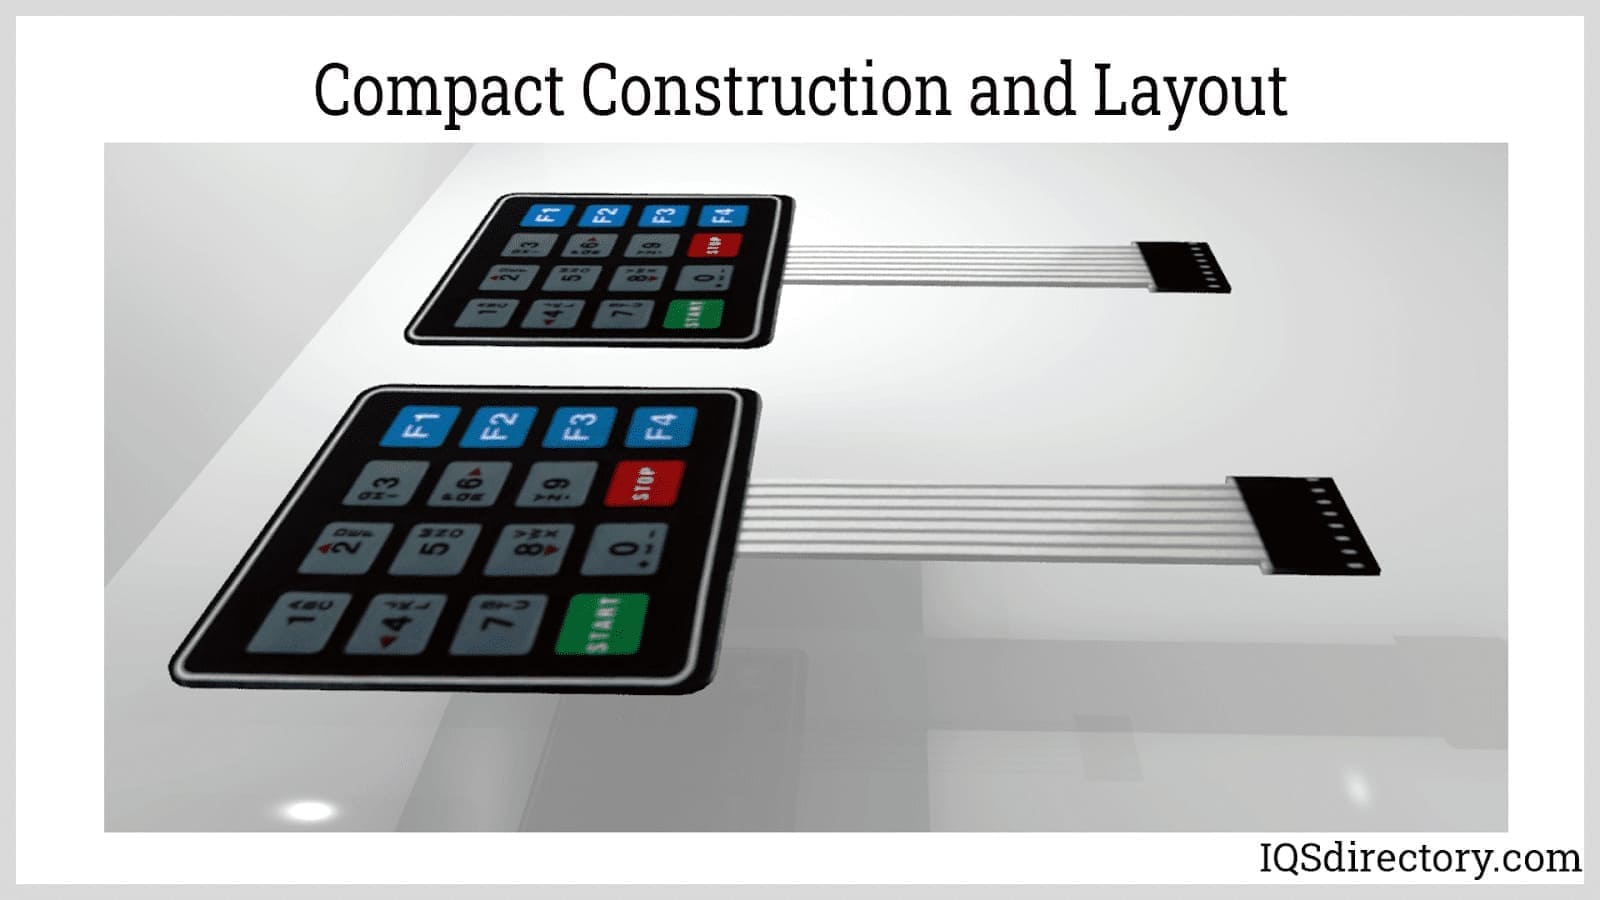 Compact Construction and Layout